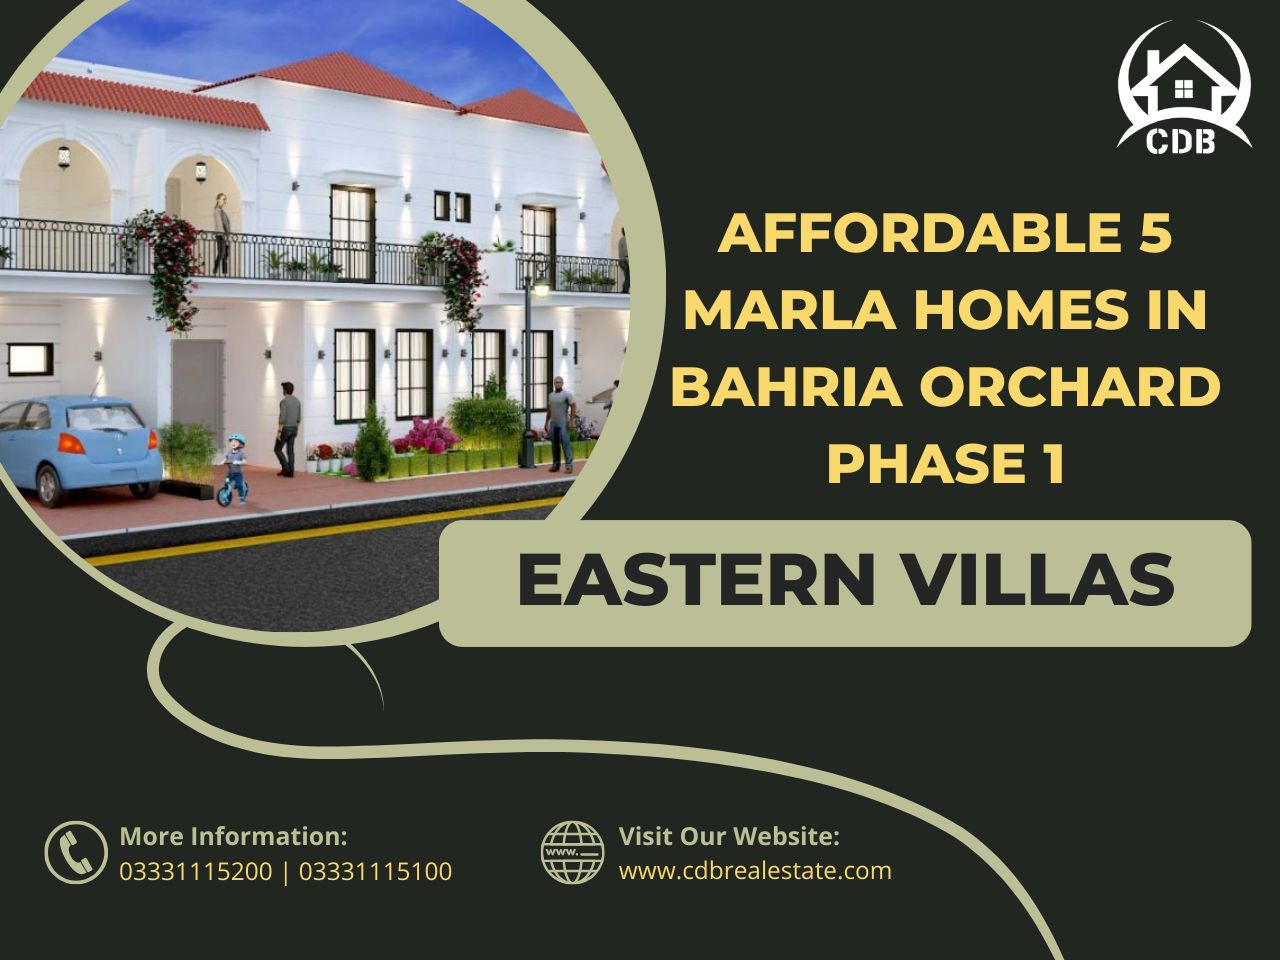 Eastern Villas: Affordable 5 Marla Homes in Bahria Orchard Phase 1